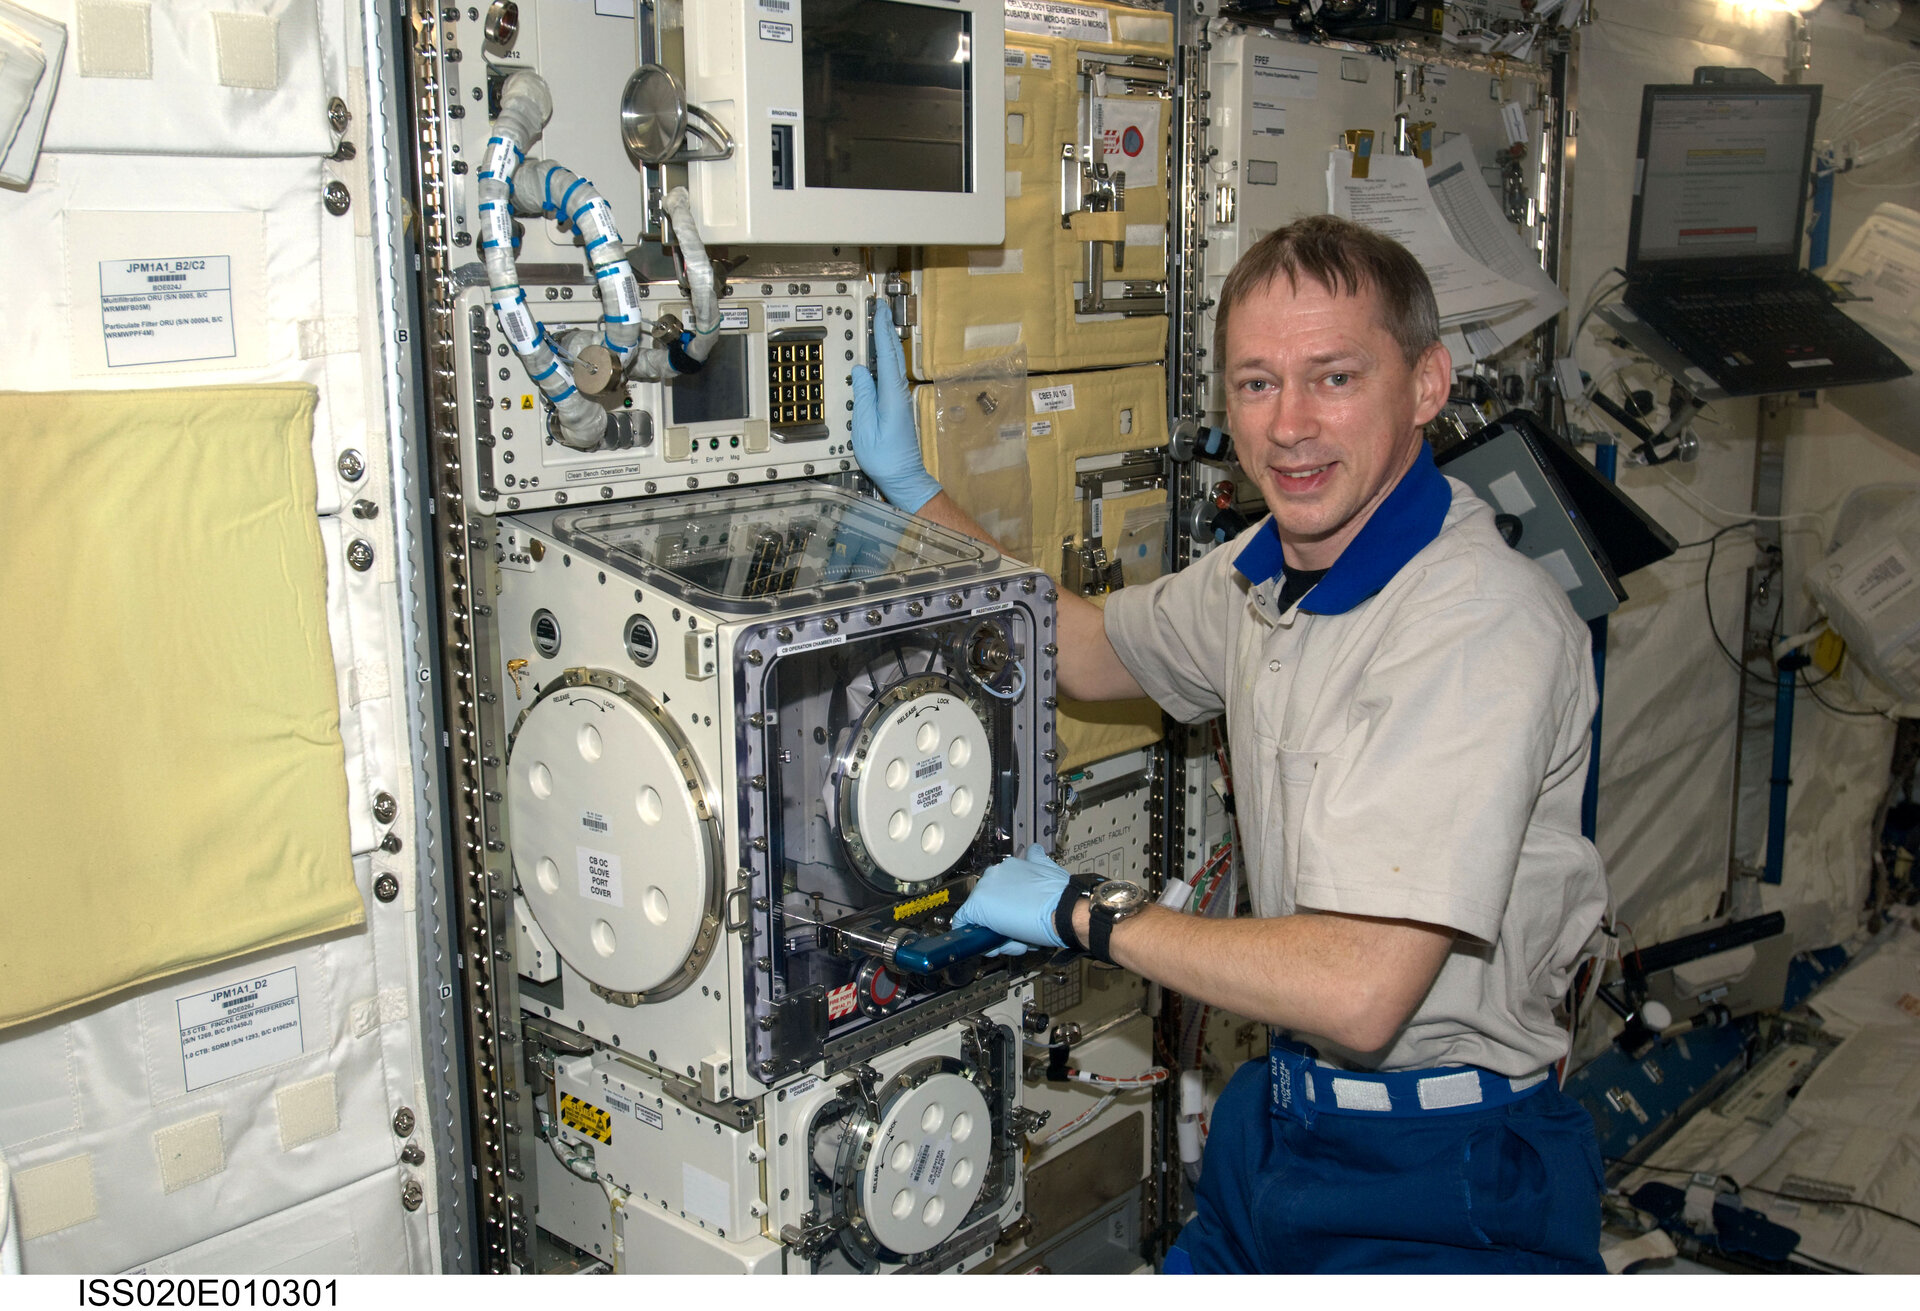 ESA astronaut Frank De Winne has been living and working on the ISS since May